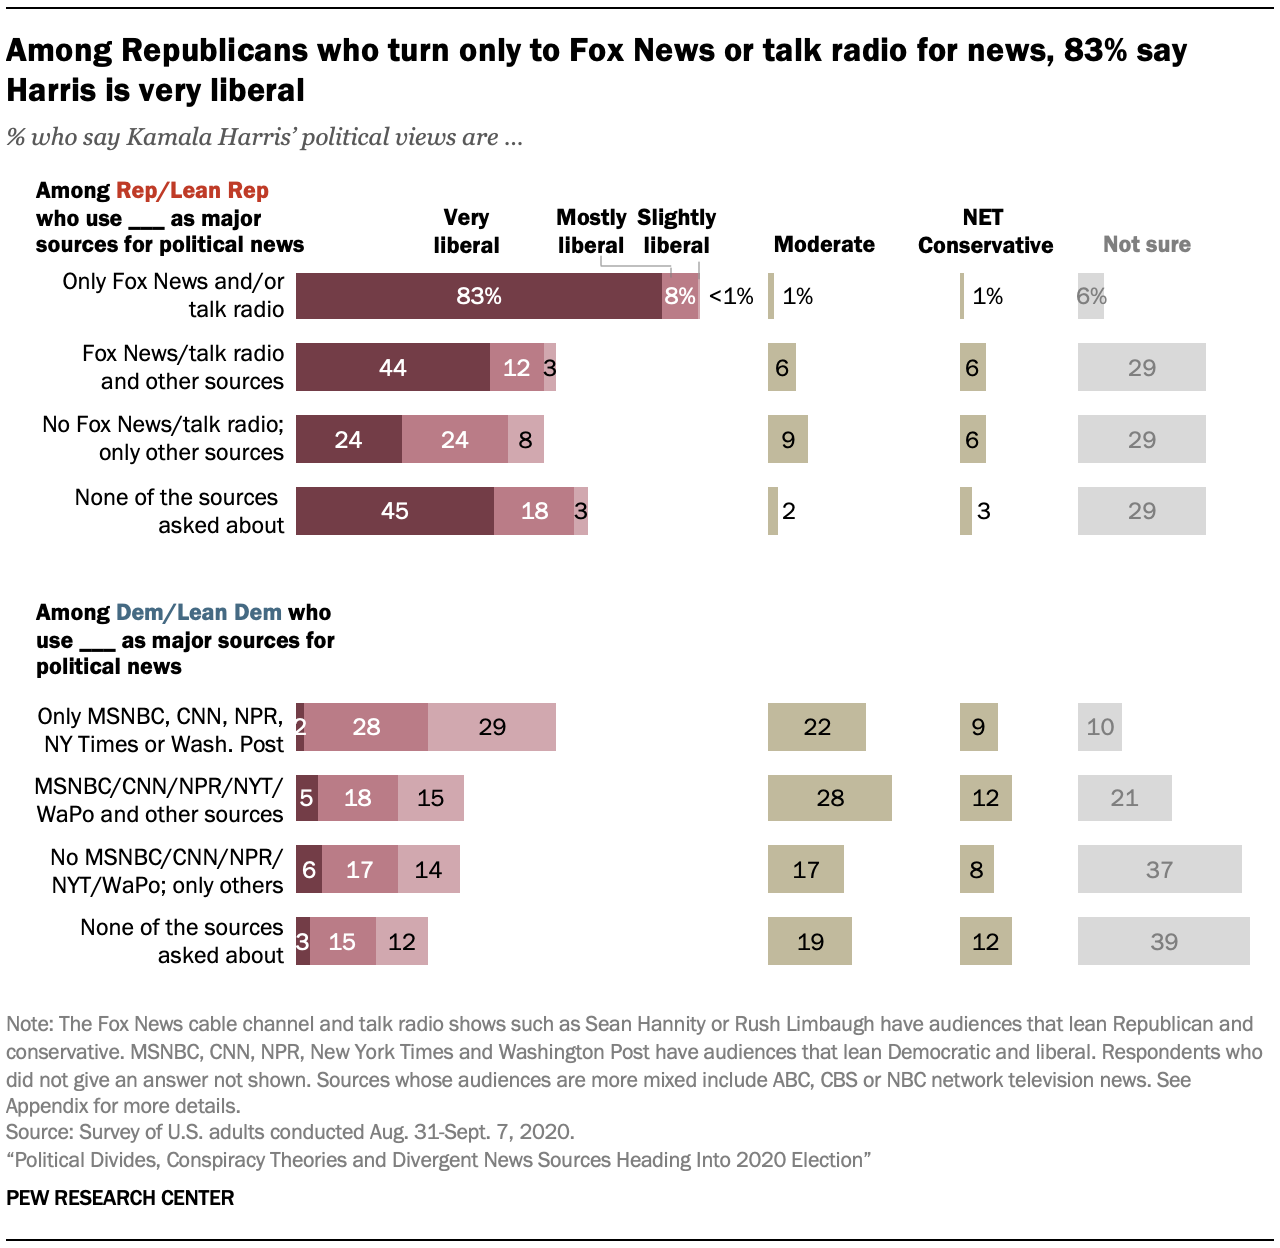 Among Republicans who turn only to Fox News or talk radio for news, 83% say Harris is very liberal